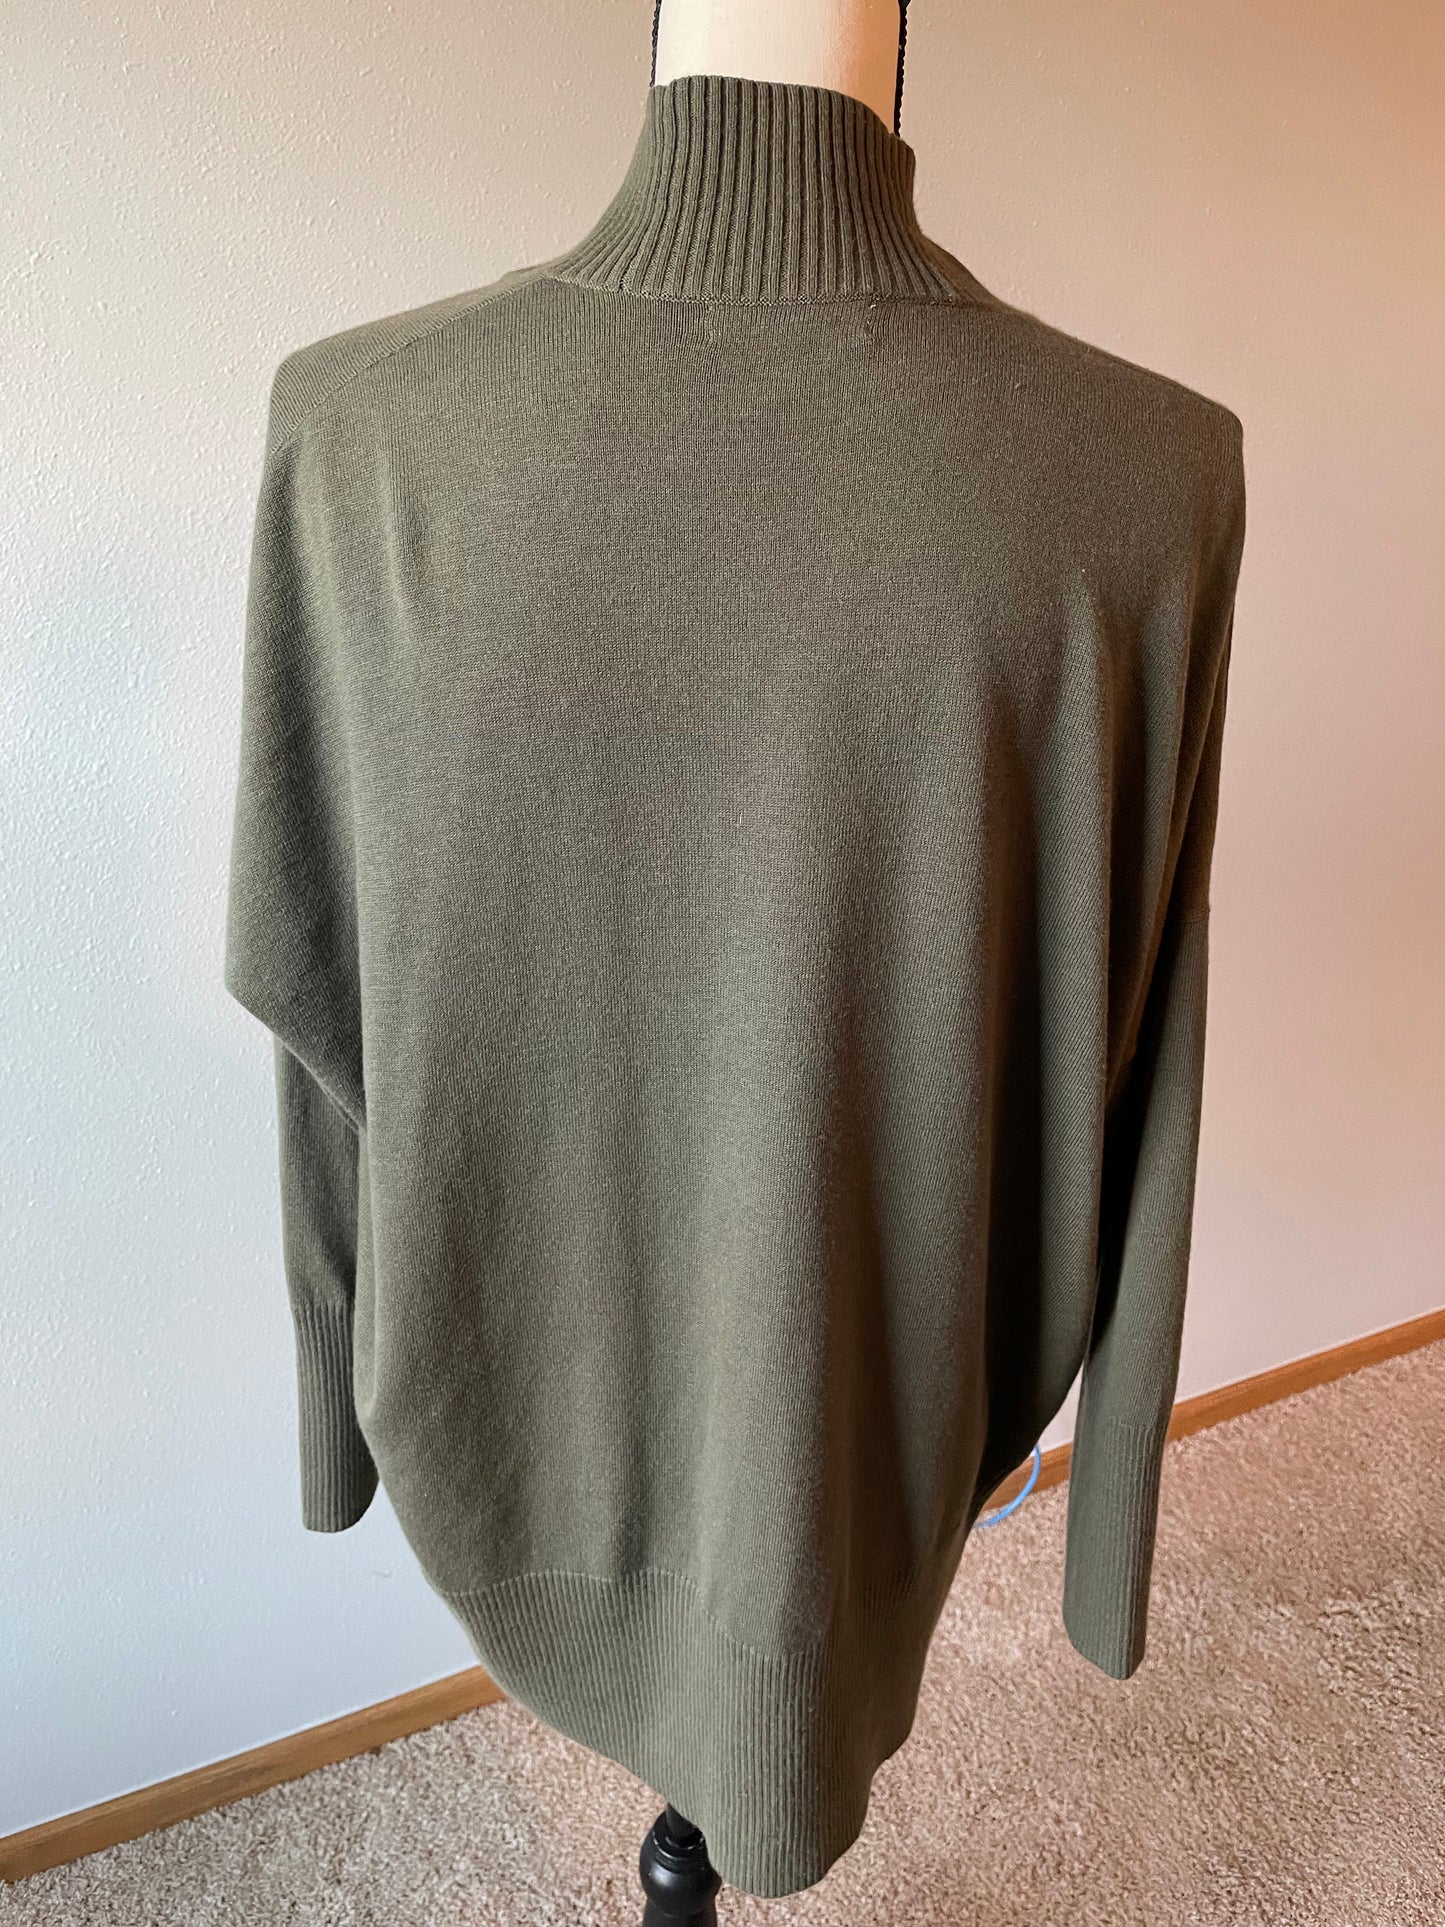 Chelsea 28 Olive Button Cardigan (XS/S)